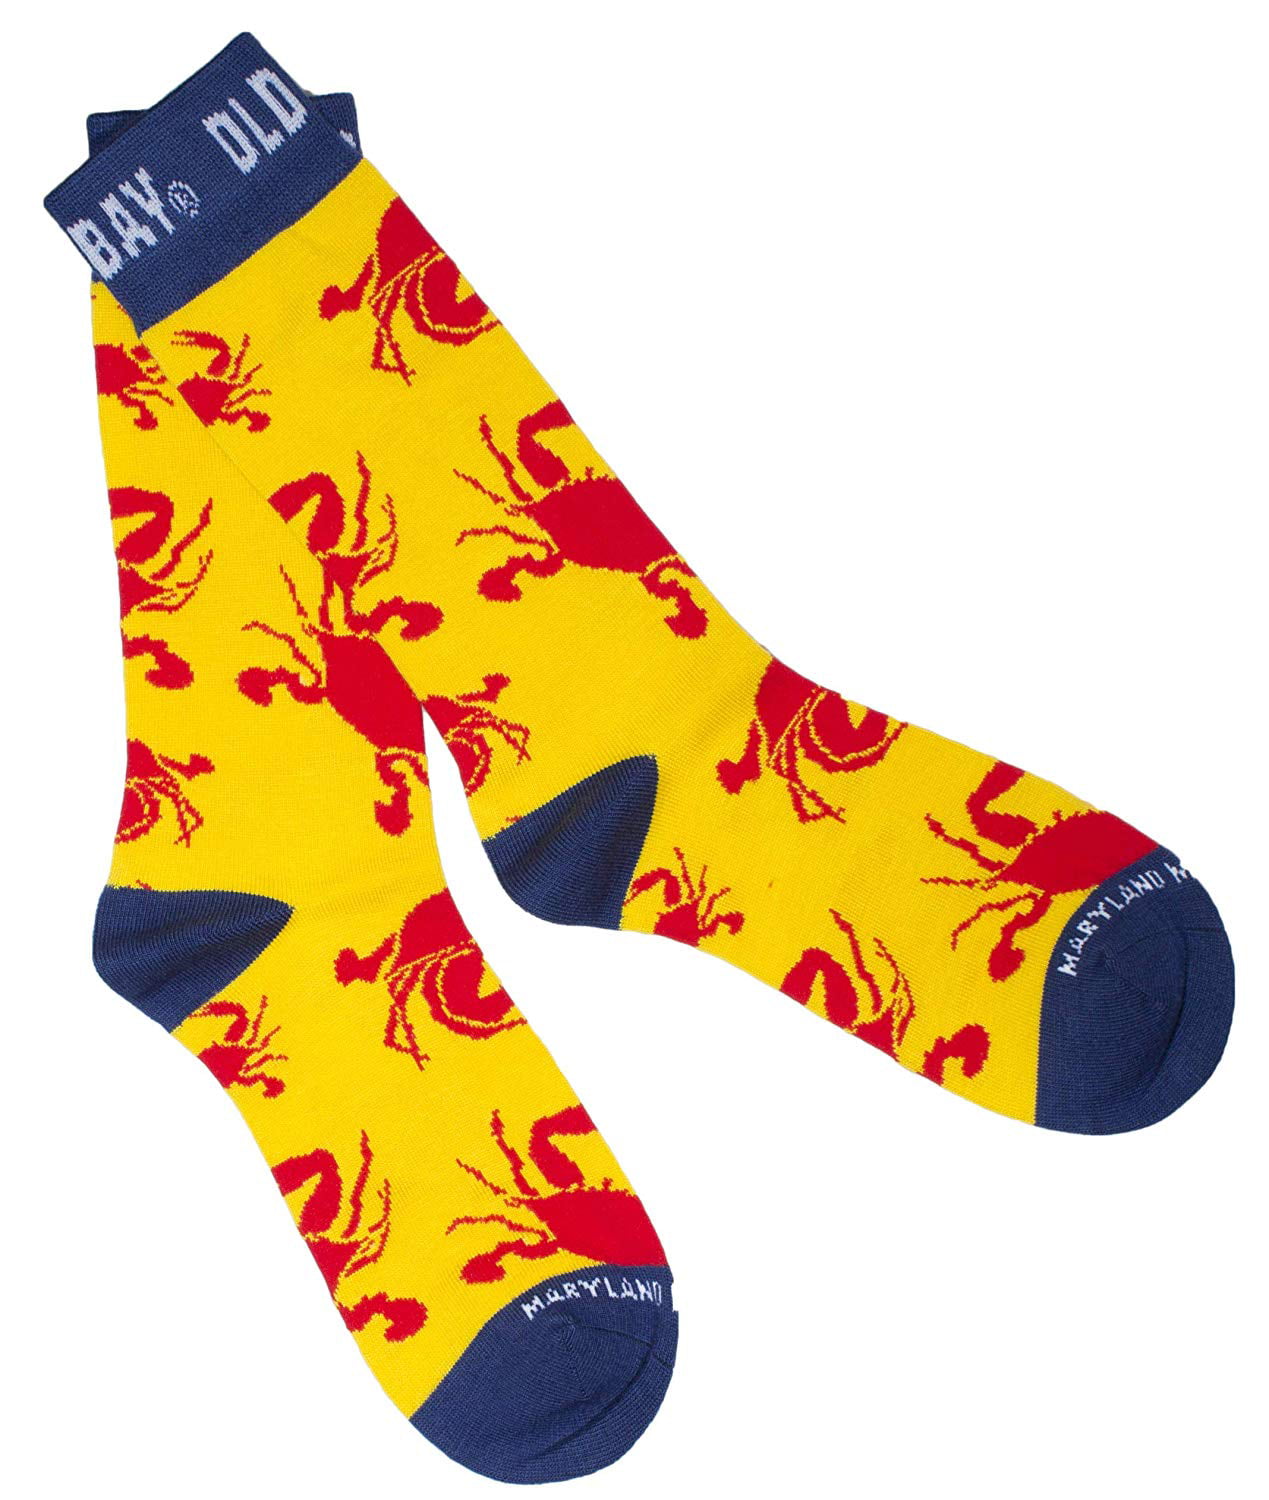 Clothing Socks - Officially Licensed Old Bay Seafood ...